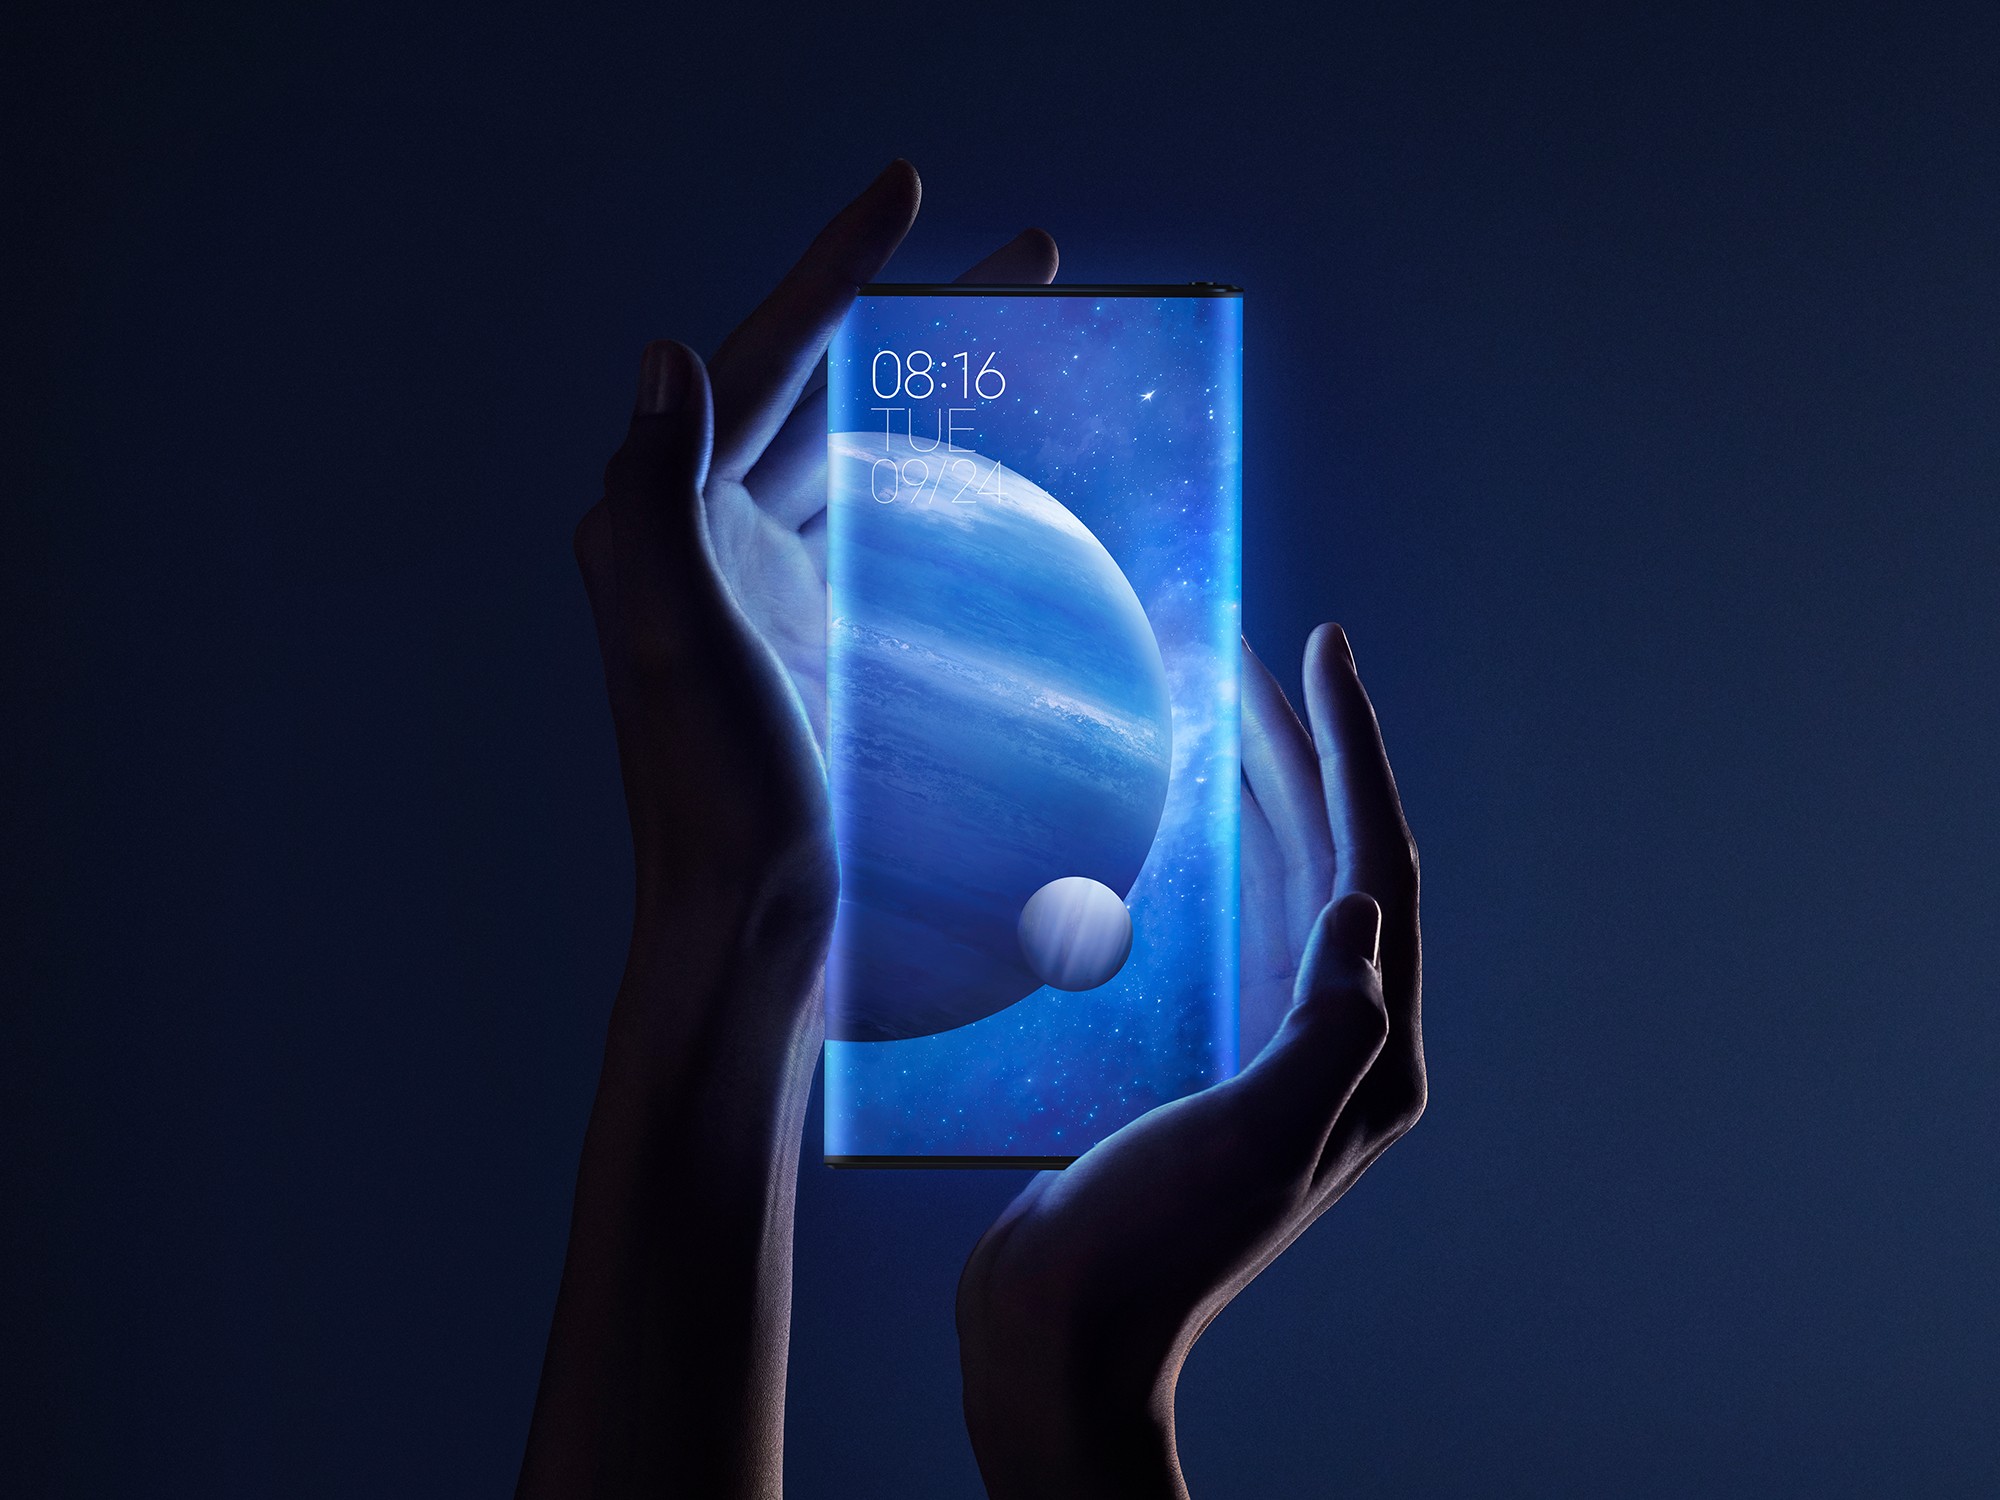 Xiaomi will debut its Mi Mix Alpha phone in December. It will come equipped with a bezel-less display and long battery life.